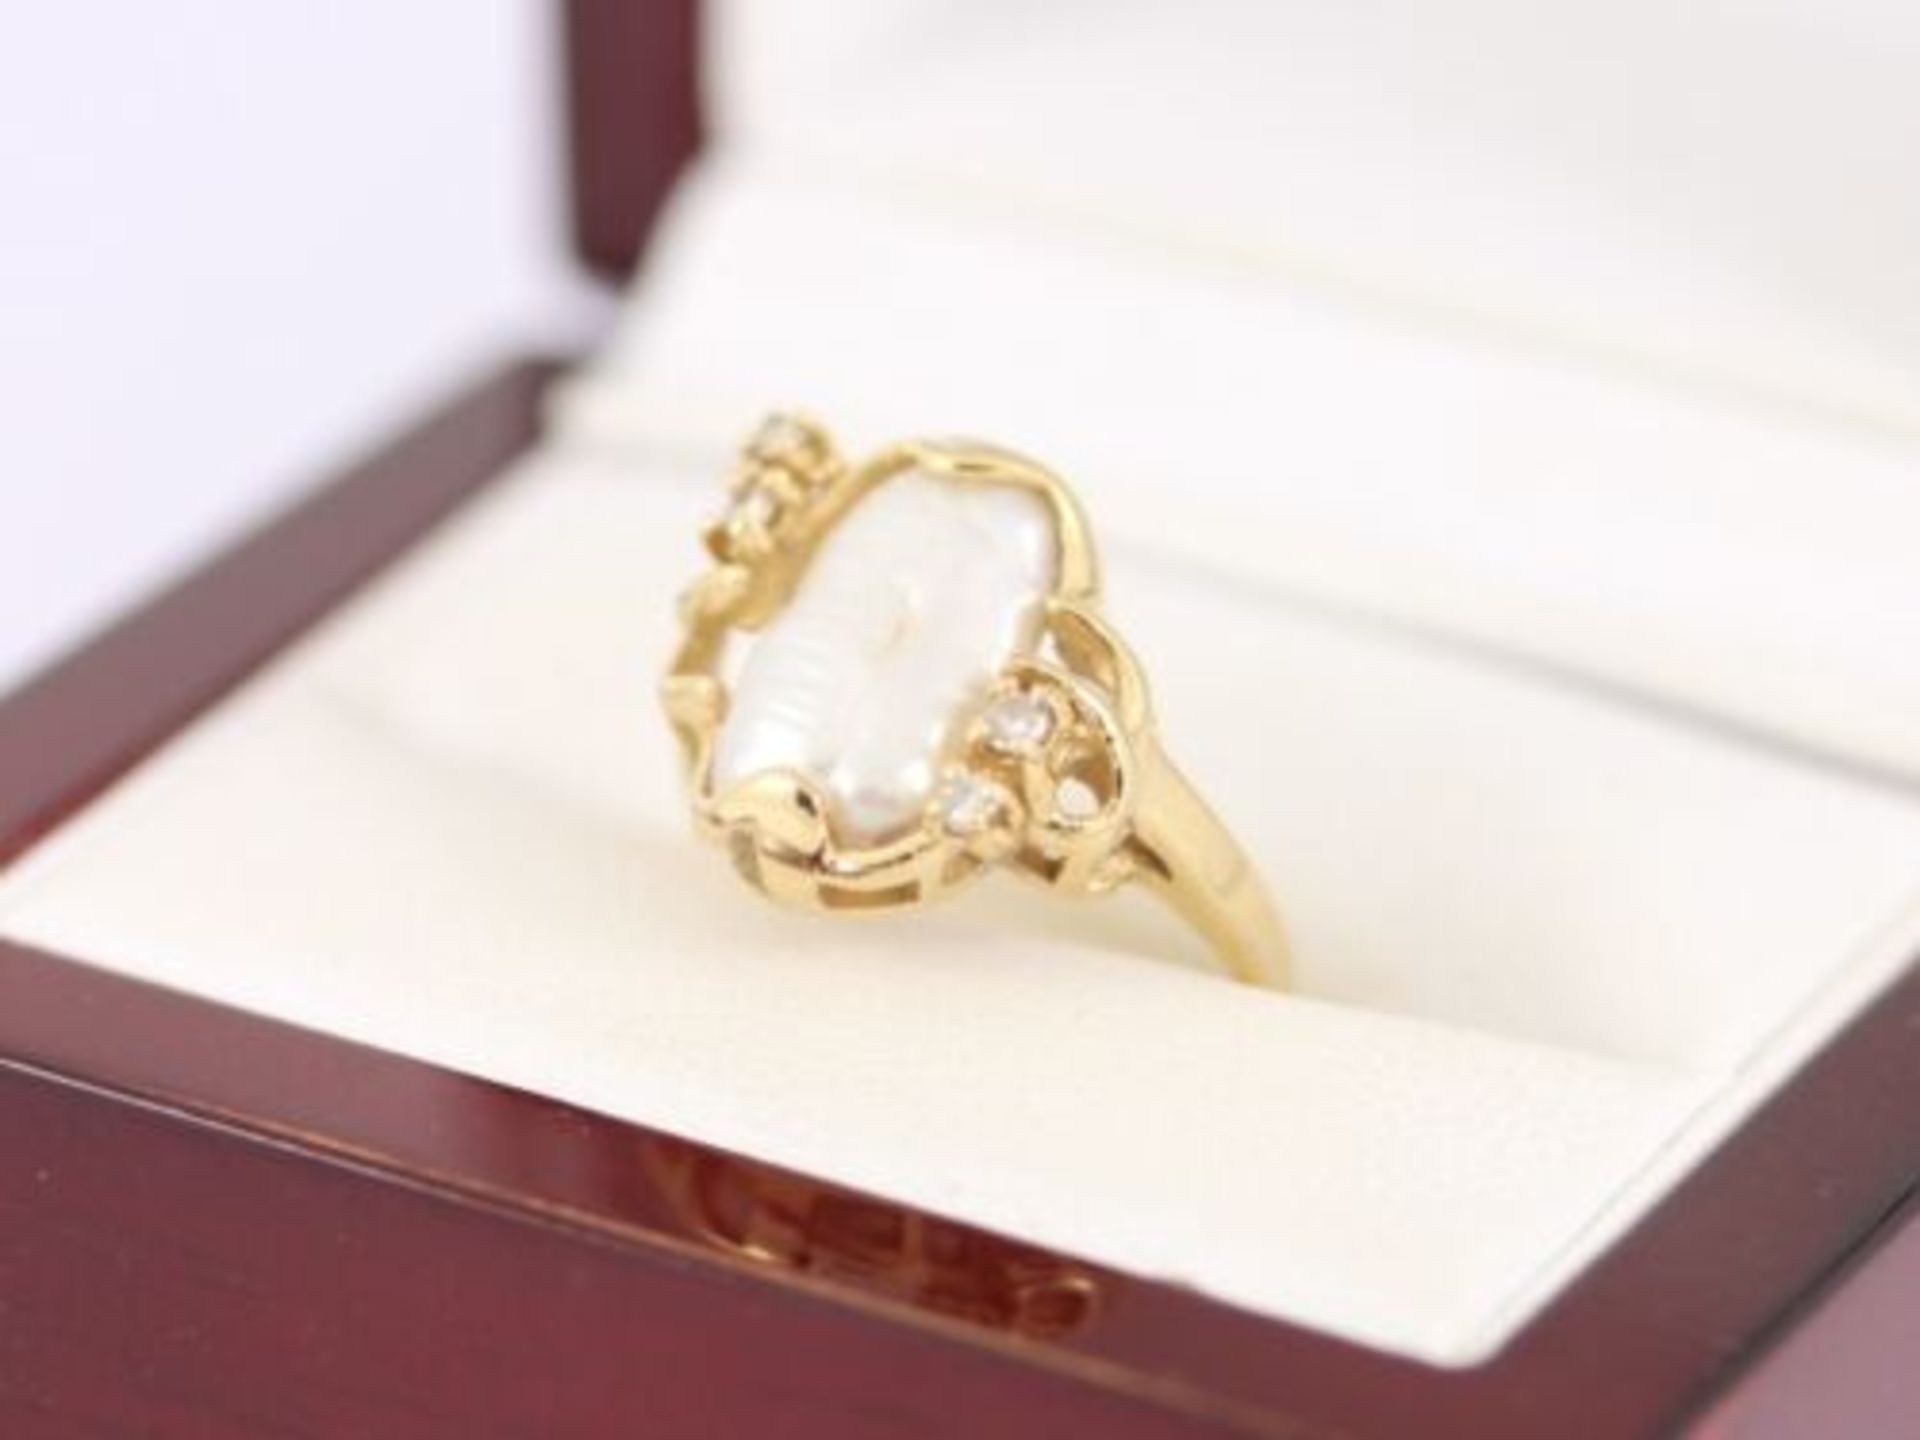 DIAMOND AND BAROQUE PEARL RING 14K GOLD LADIES STUNNING SIZE J 585 3.3G - Image 4 of 4